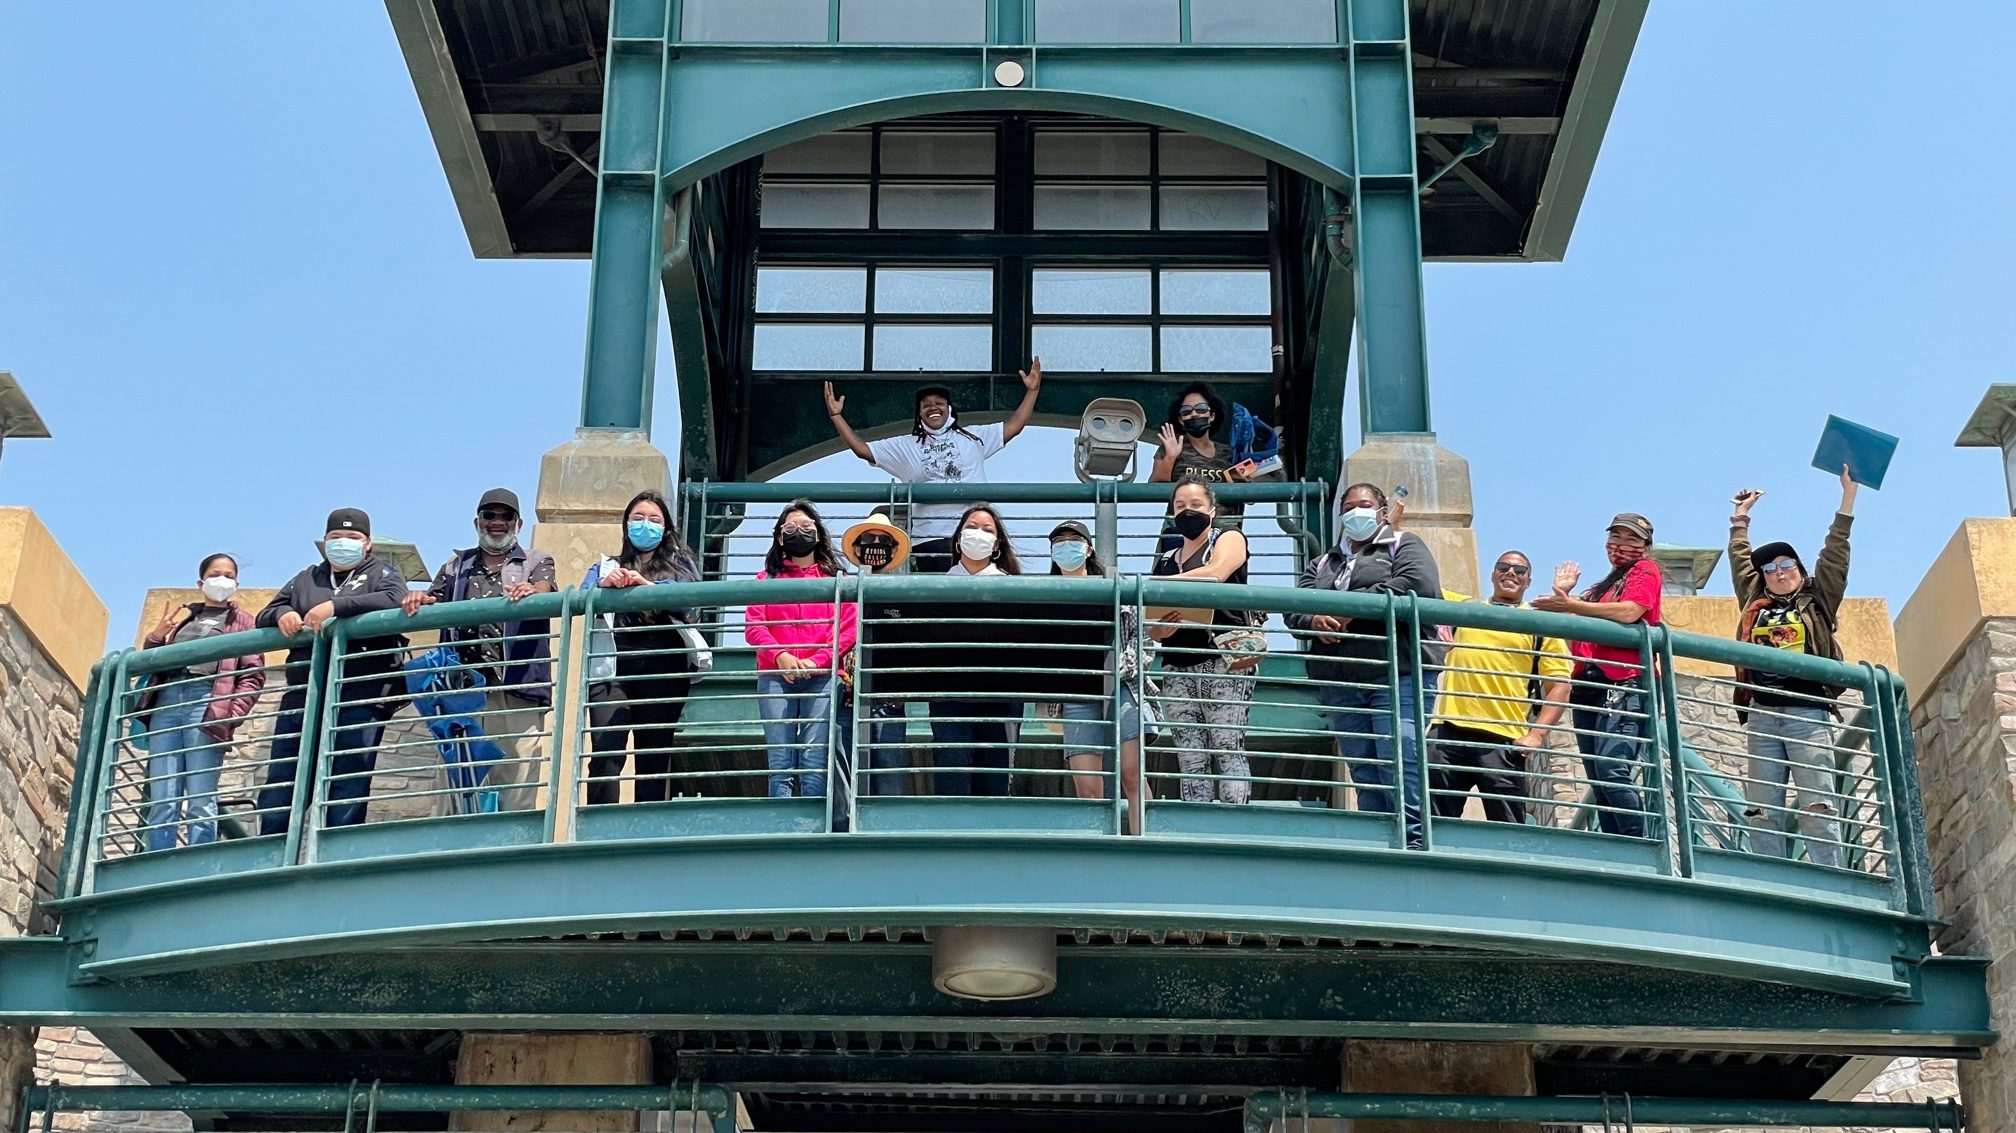 15 students of mixed ages stand atop a large green viewing deck behind a green metal railing, smiling and waving at the camera on a sunny afternoon.